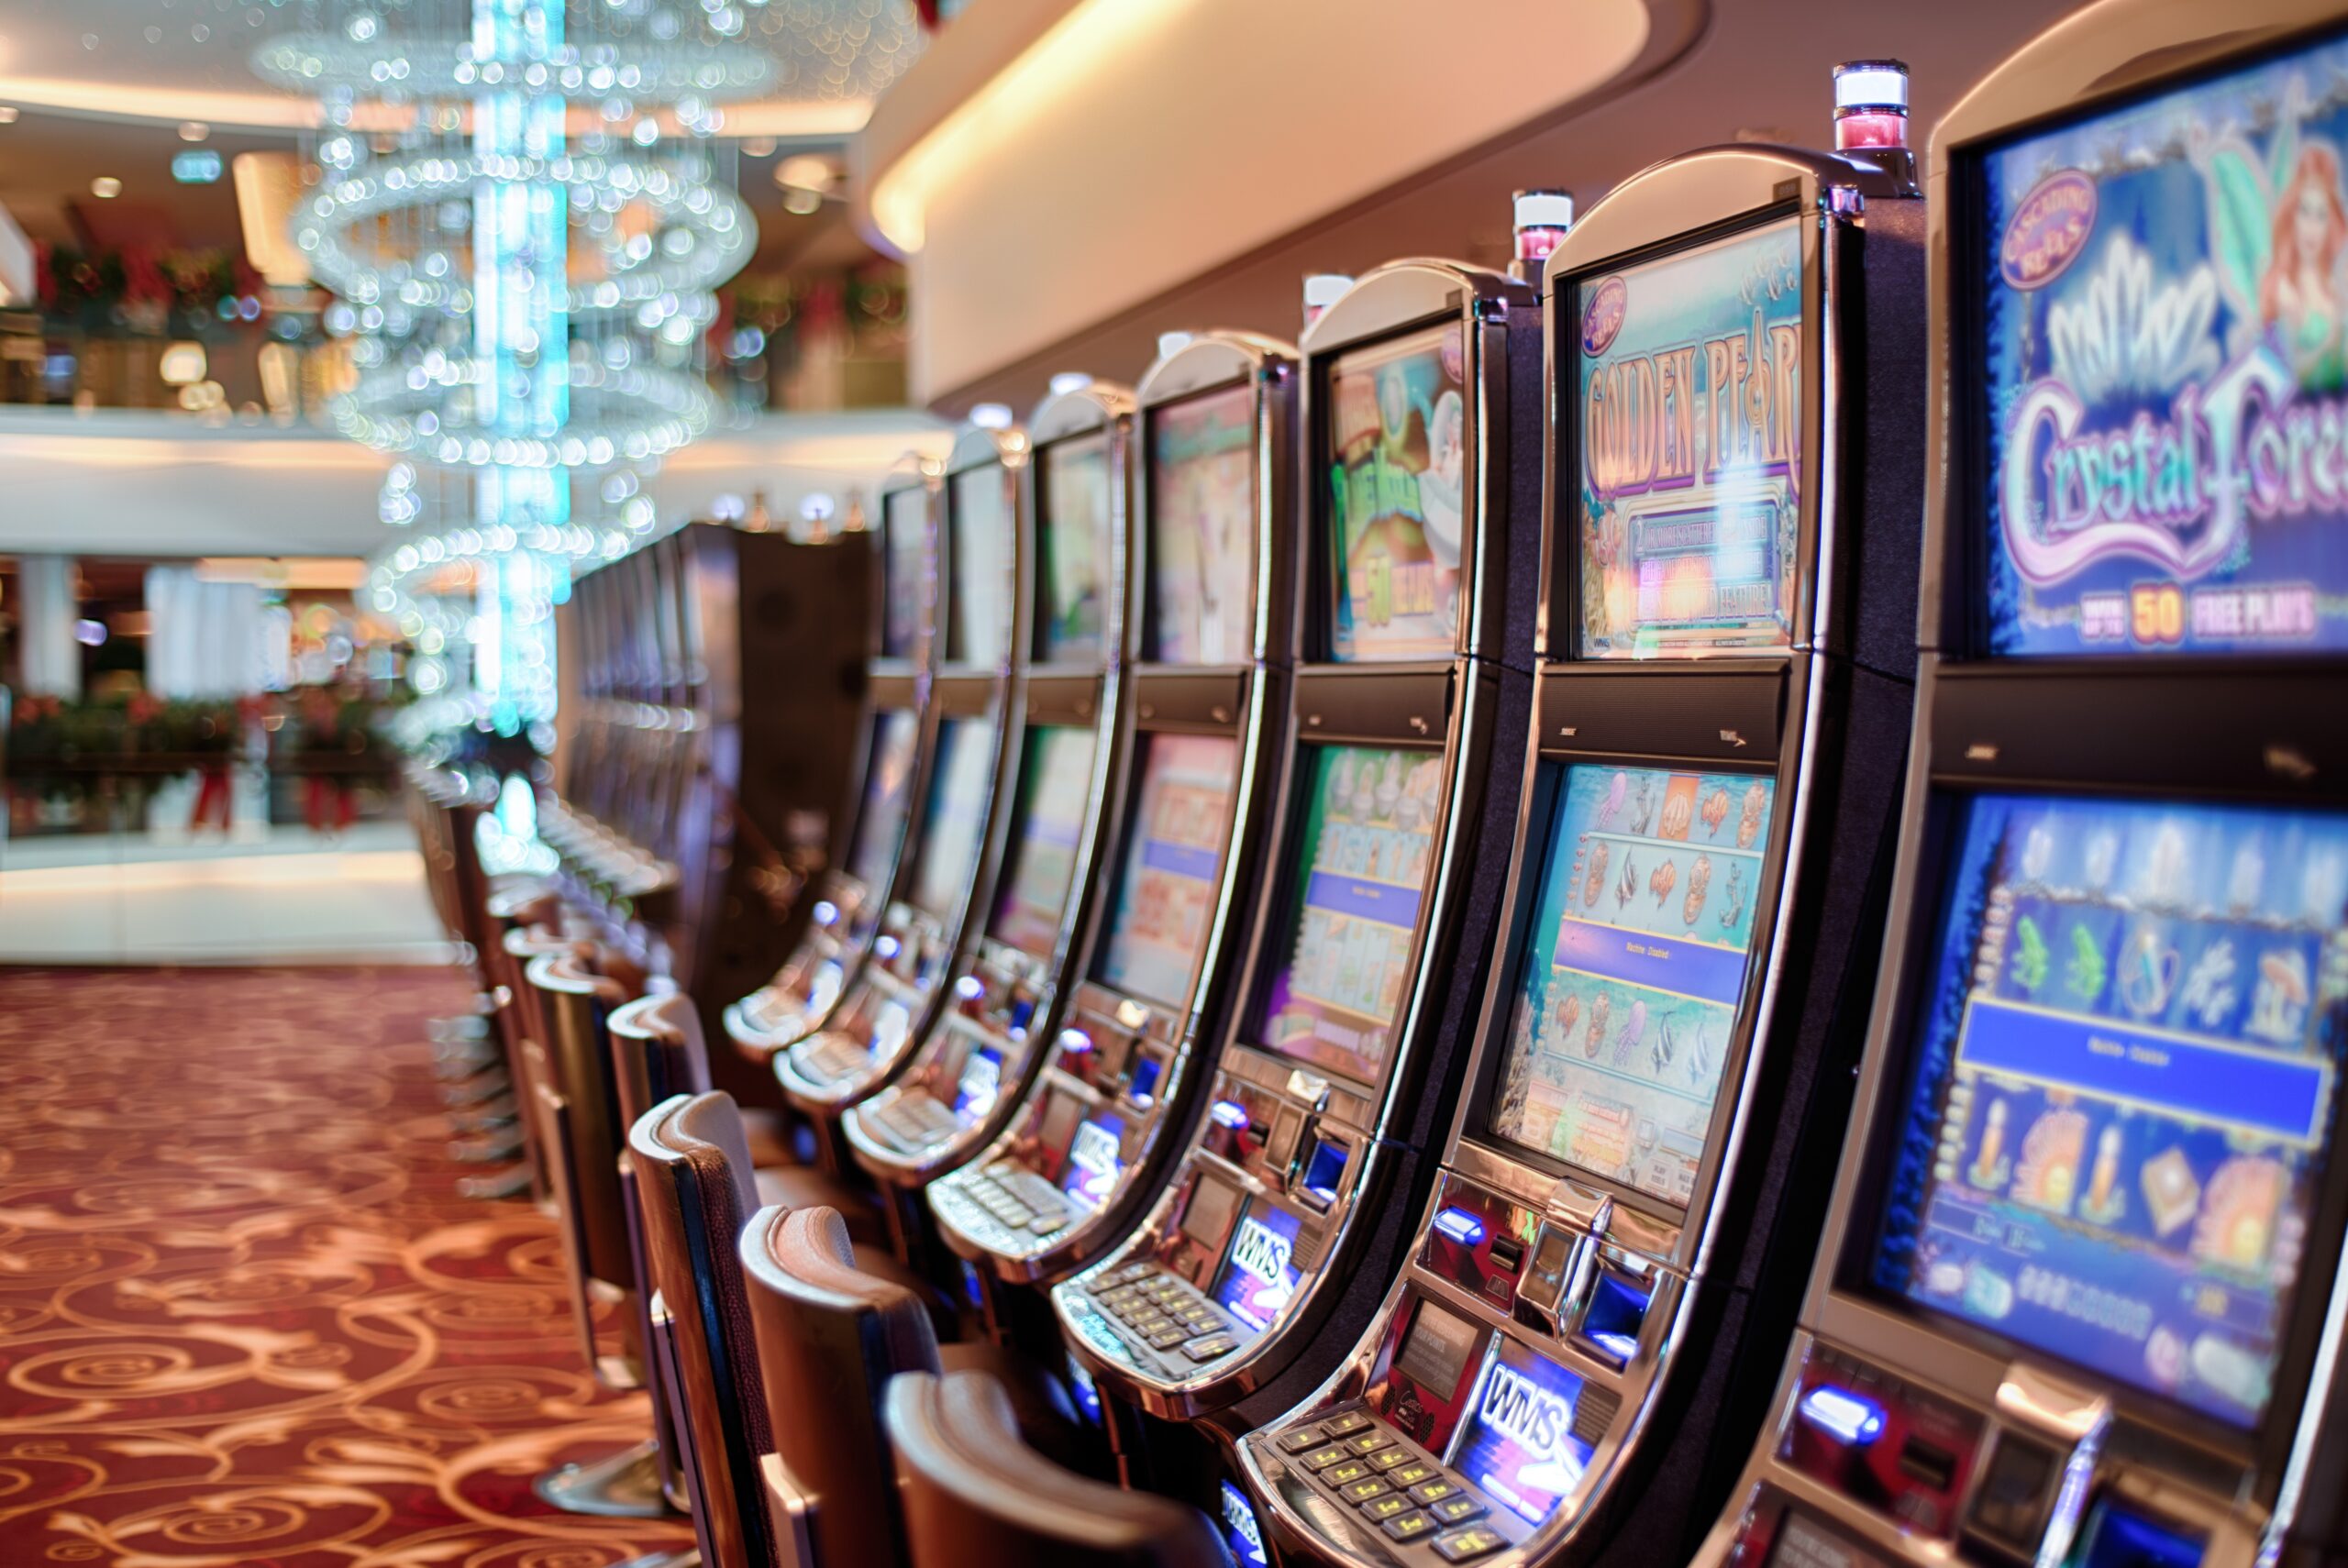 The role of Casino and Game industry